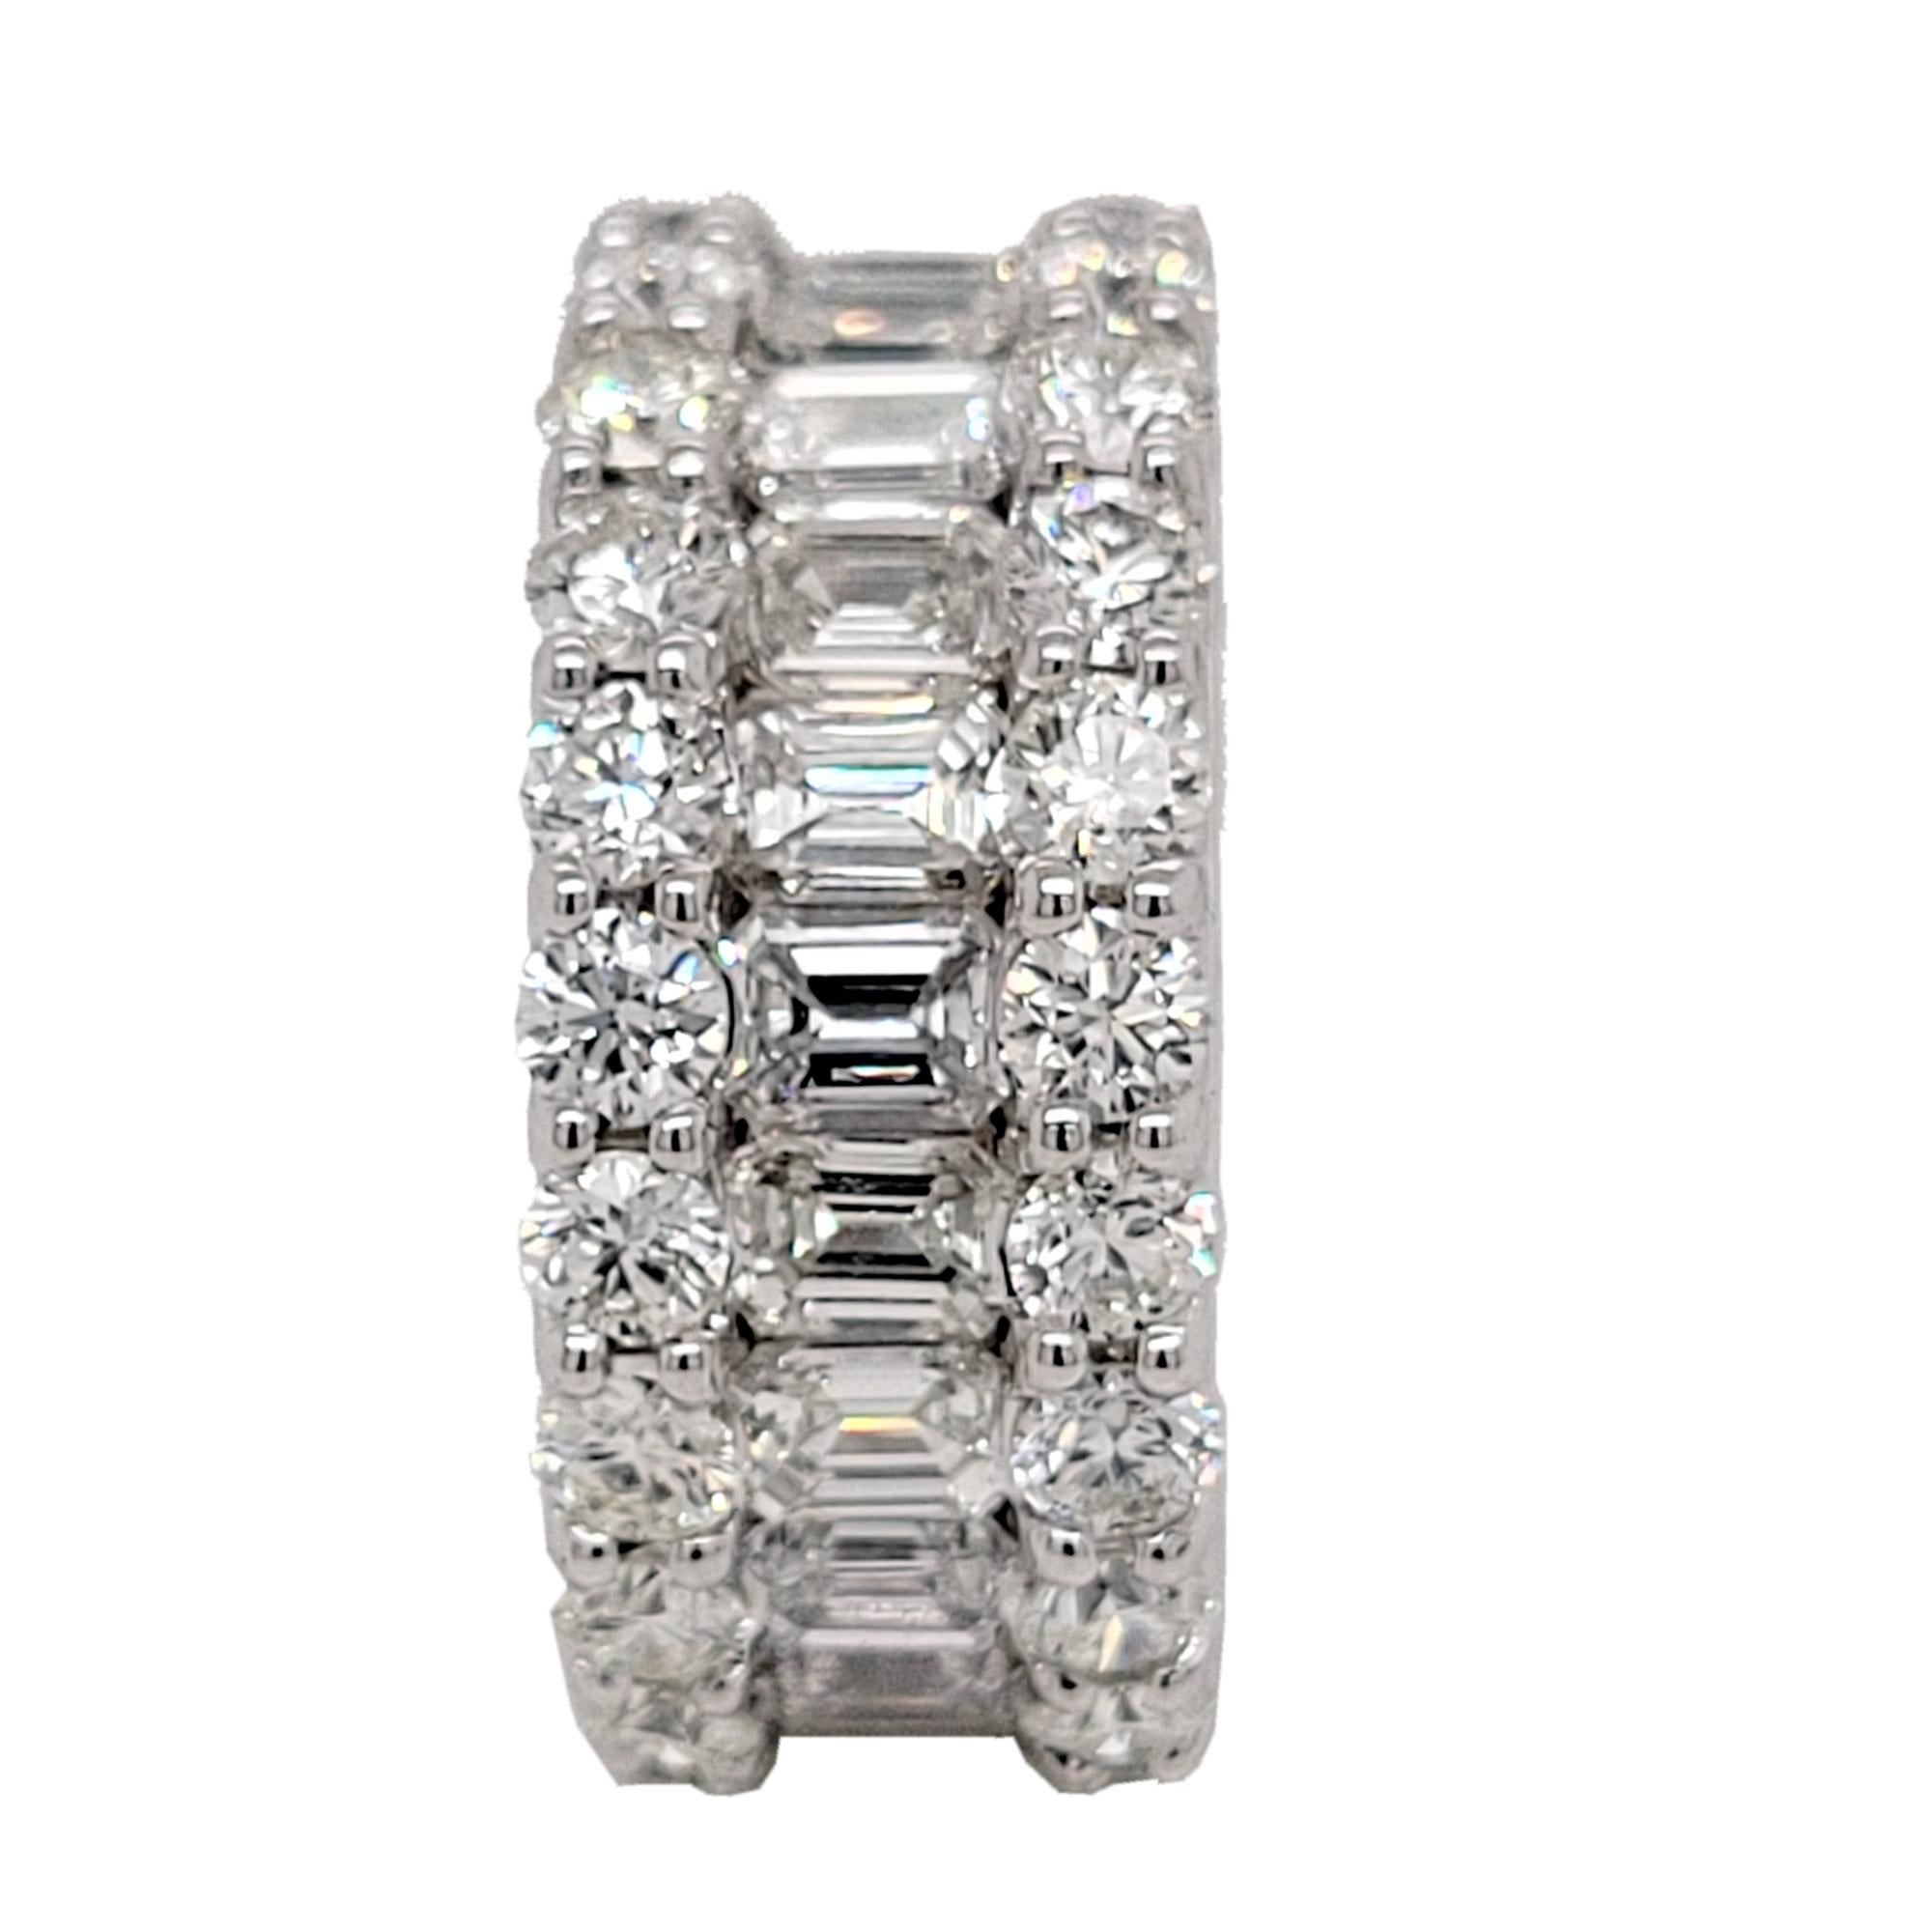 This beautiful Eternity Ring is made in 18K White Gold showcasing 22 perfectly matched VS/E-F Emerald Cut and 44 Round Brilliant Diamonds. Emerald Cut diamonds are channel set in the center with Round diamonds set in Shared Prong Mode on the